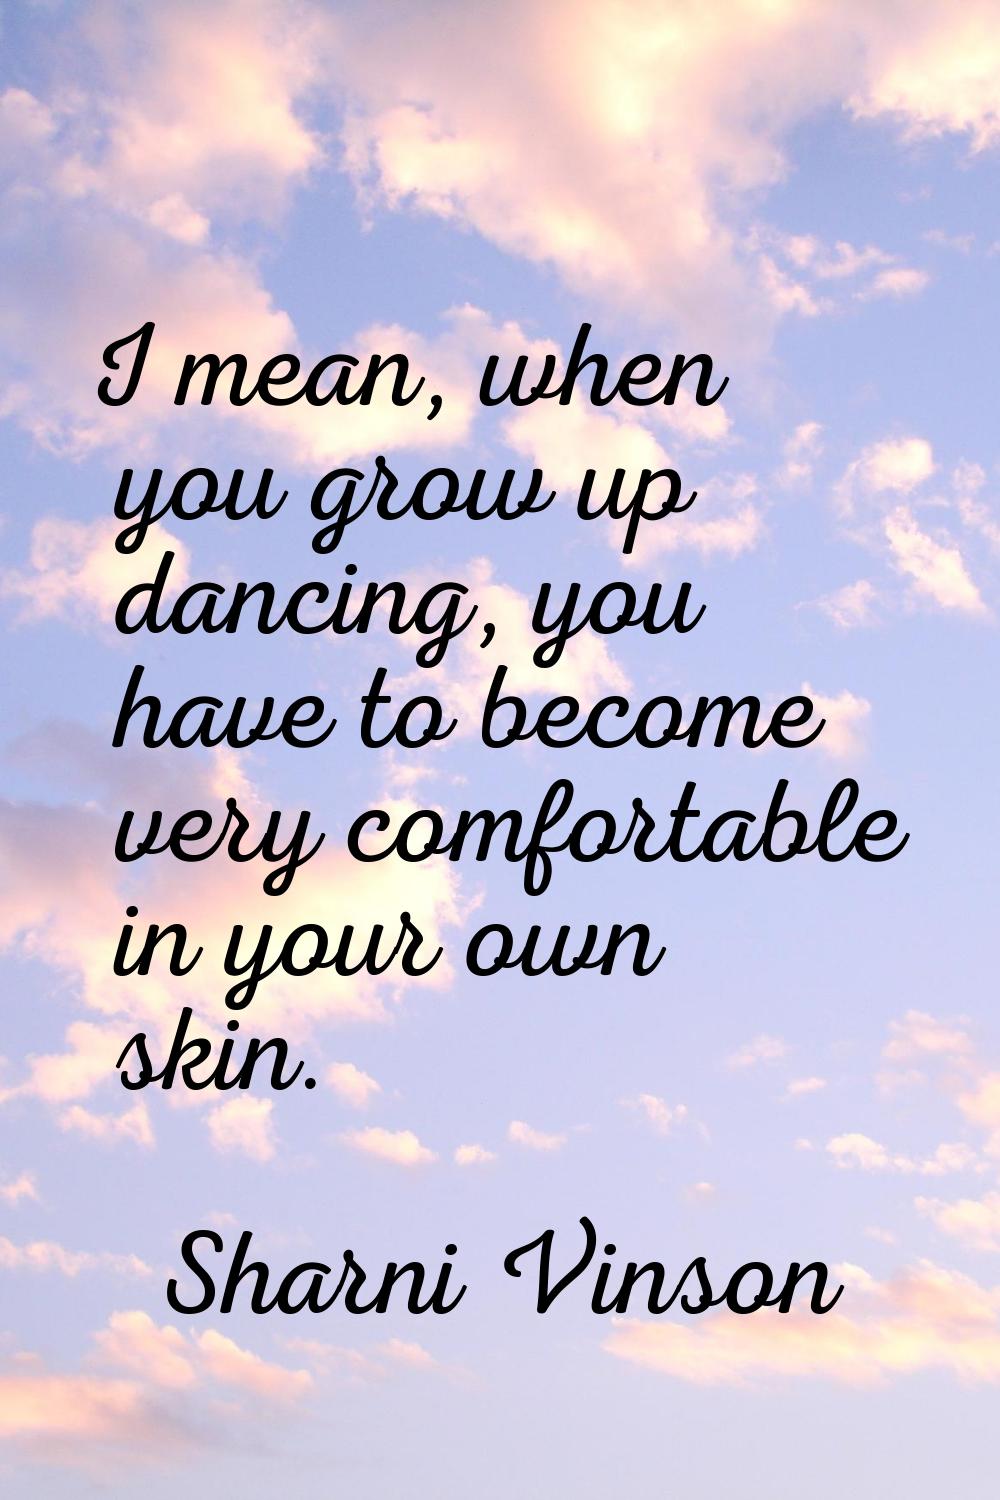 I mean, when you grow up dancing, you have to become very comfortable in your own skin.